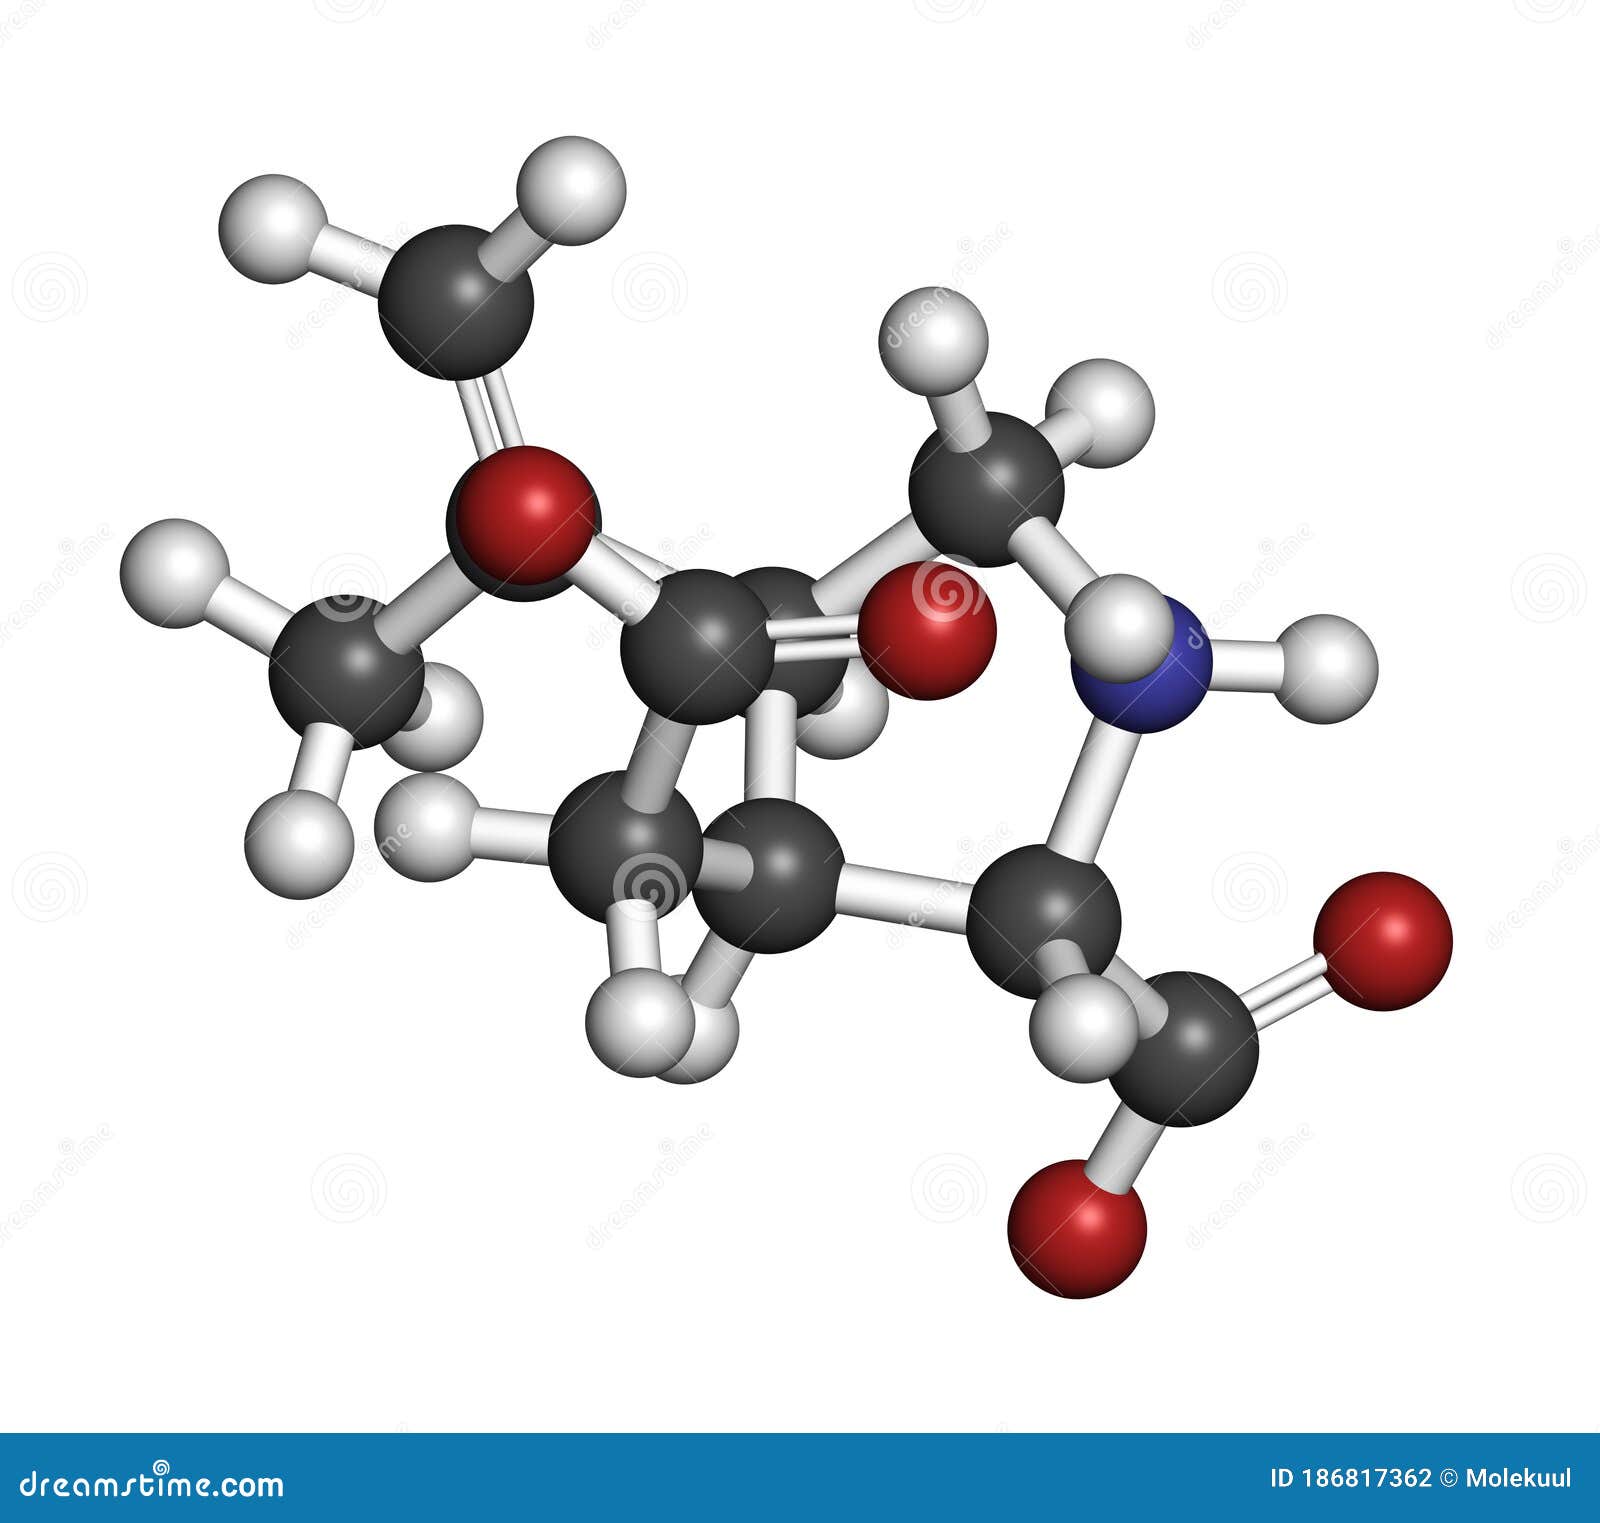 kainic acid molecule. direct agonist of the glutamic kainate receptors. 3d rendering. atoms are represented as spheres with